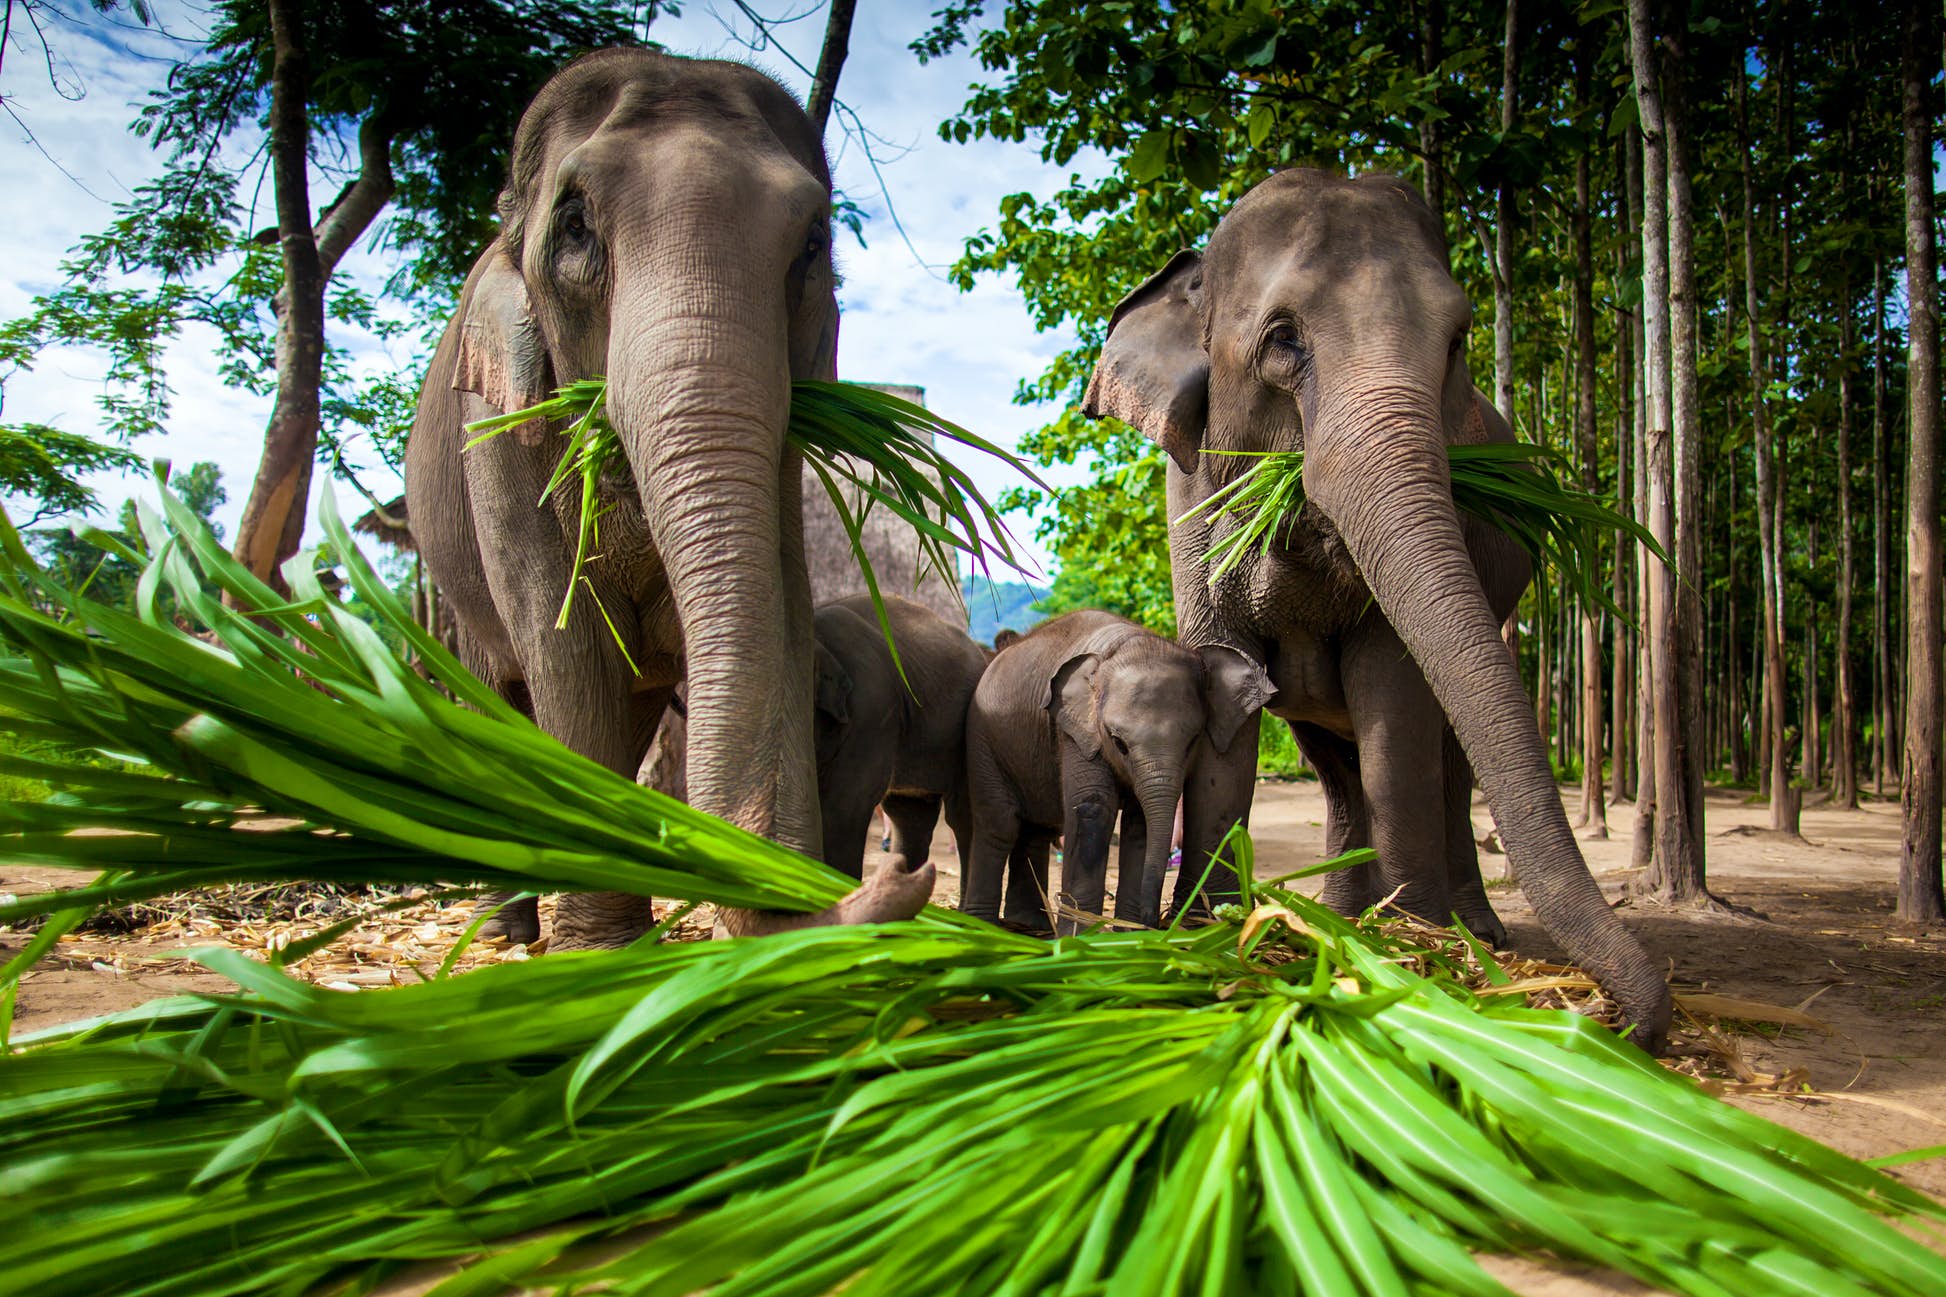 Adult and baby elephants eating sugar cane in Chiang Mai ©hangingpixels/Shutterstock